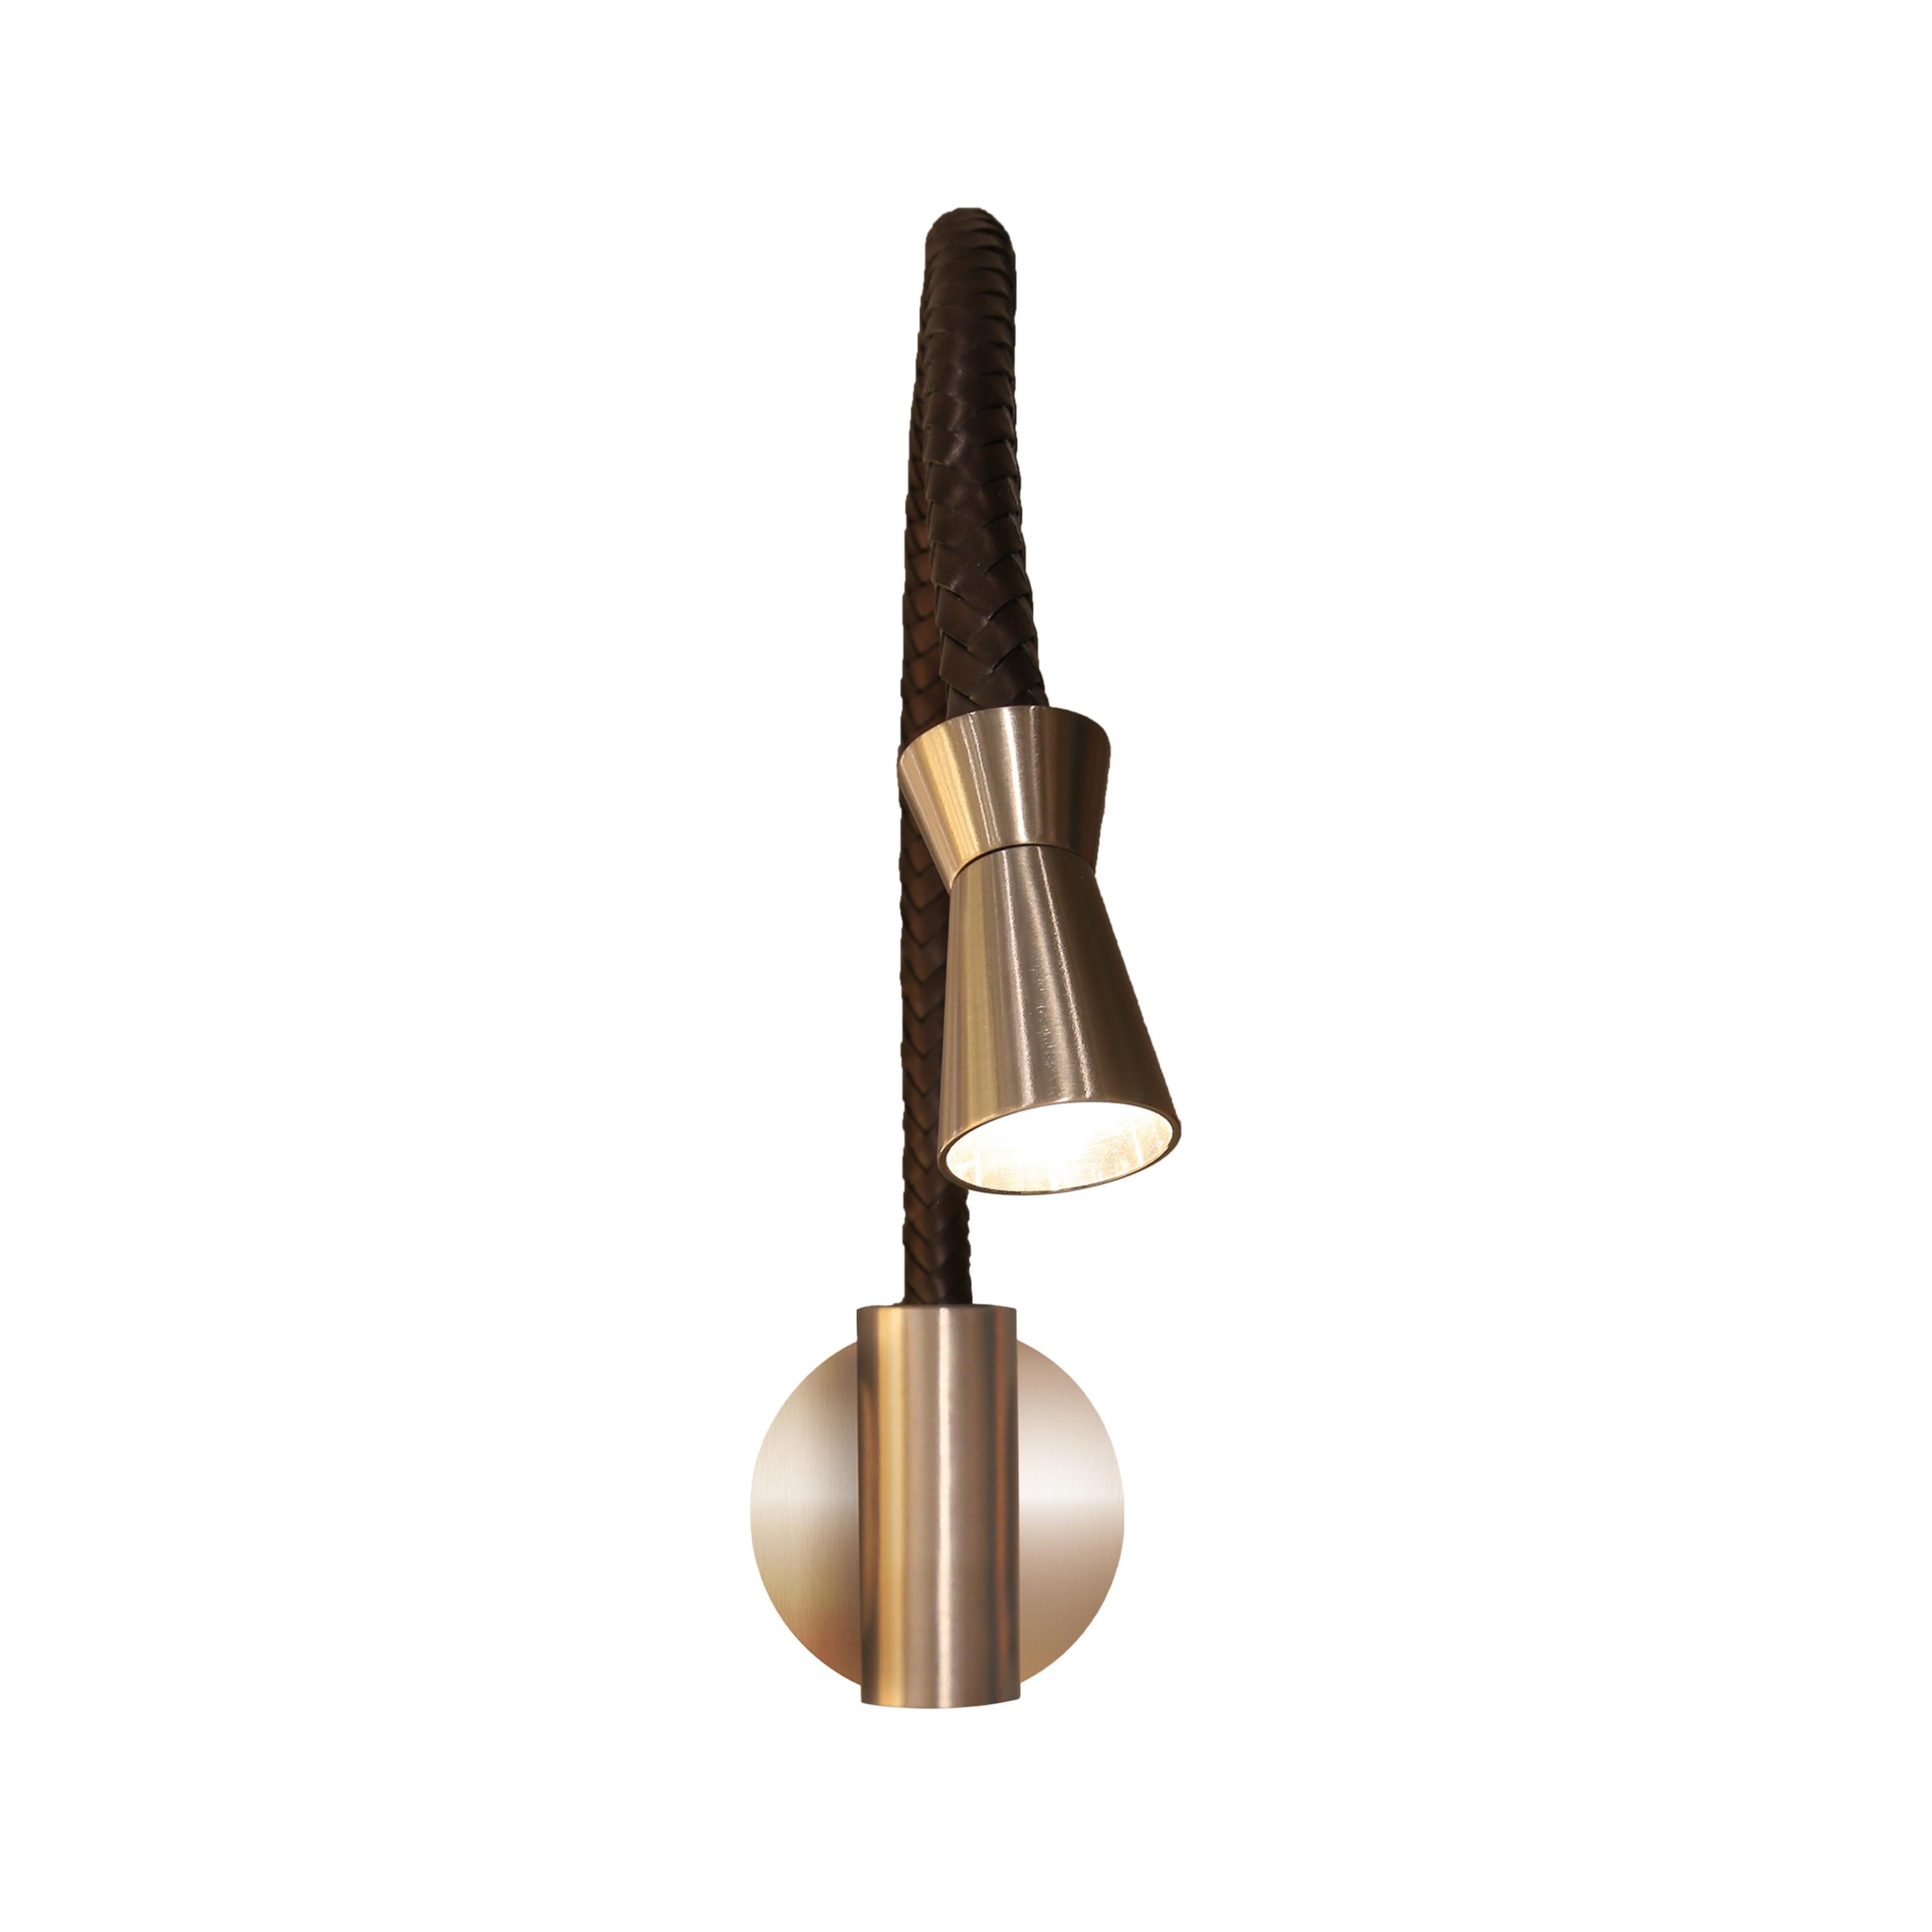 G+T Hard-Wired Reading Lamp with PVD Copper Bronze Base and Diffuser, and Dark For Sale